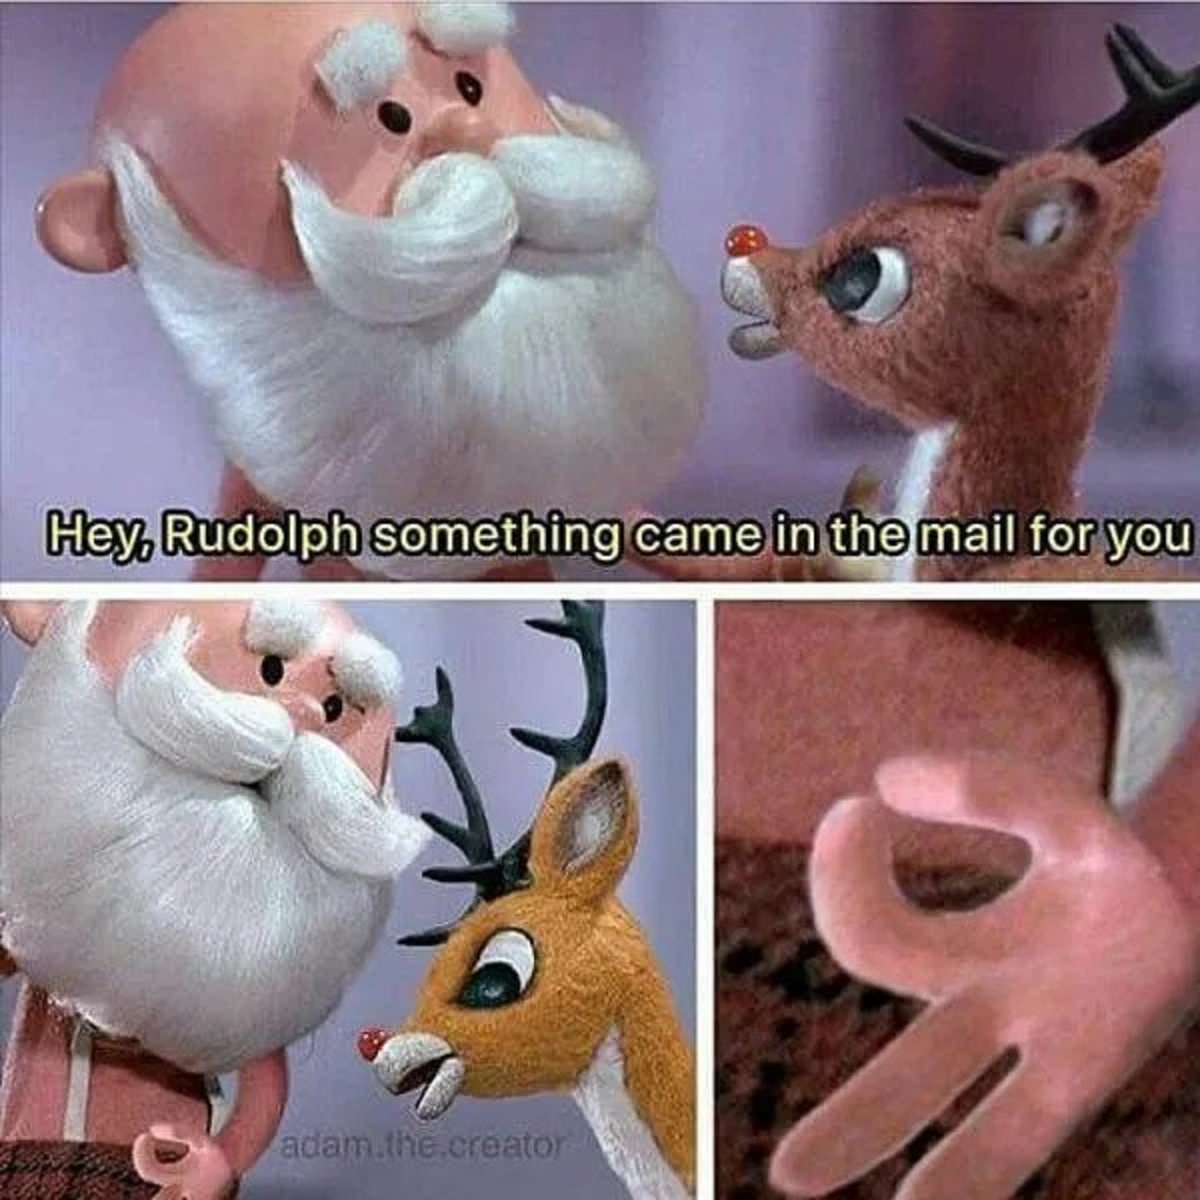 spicy memes - funny holiday reindeer meme - Hey, Rudolph something came in the mail for you adam.the.creator